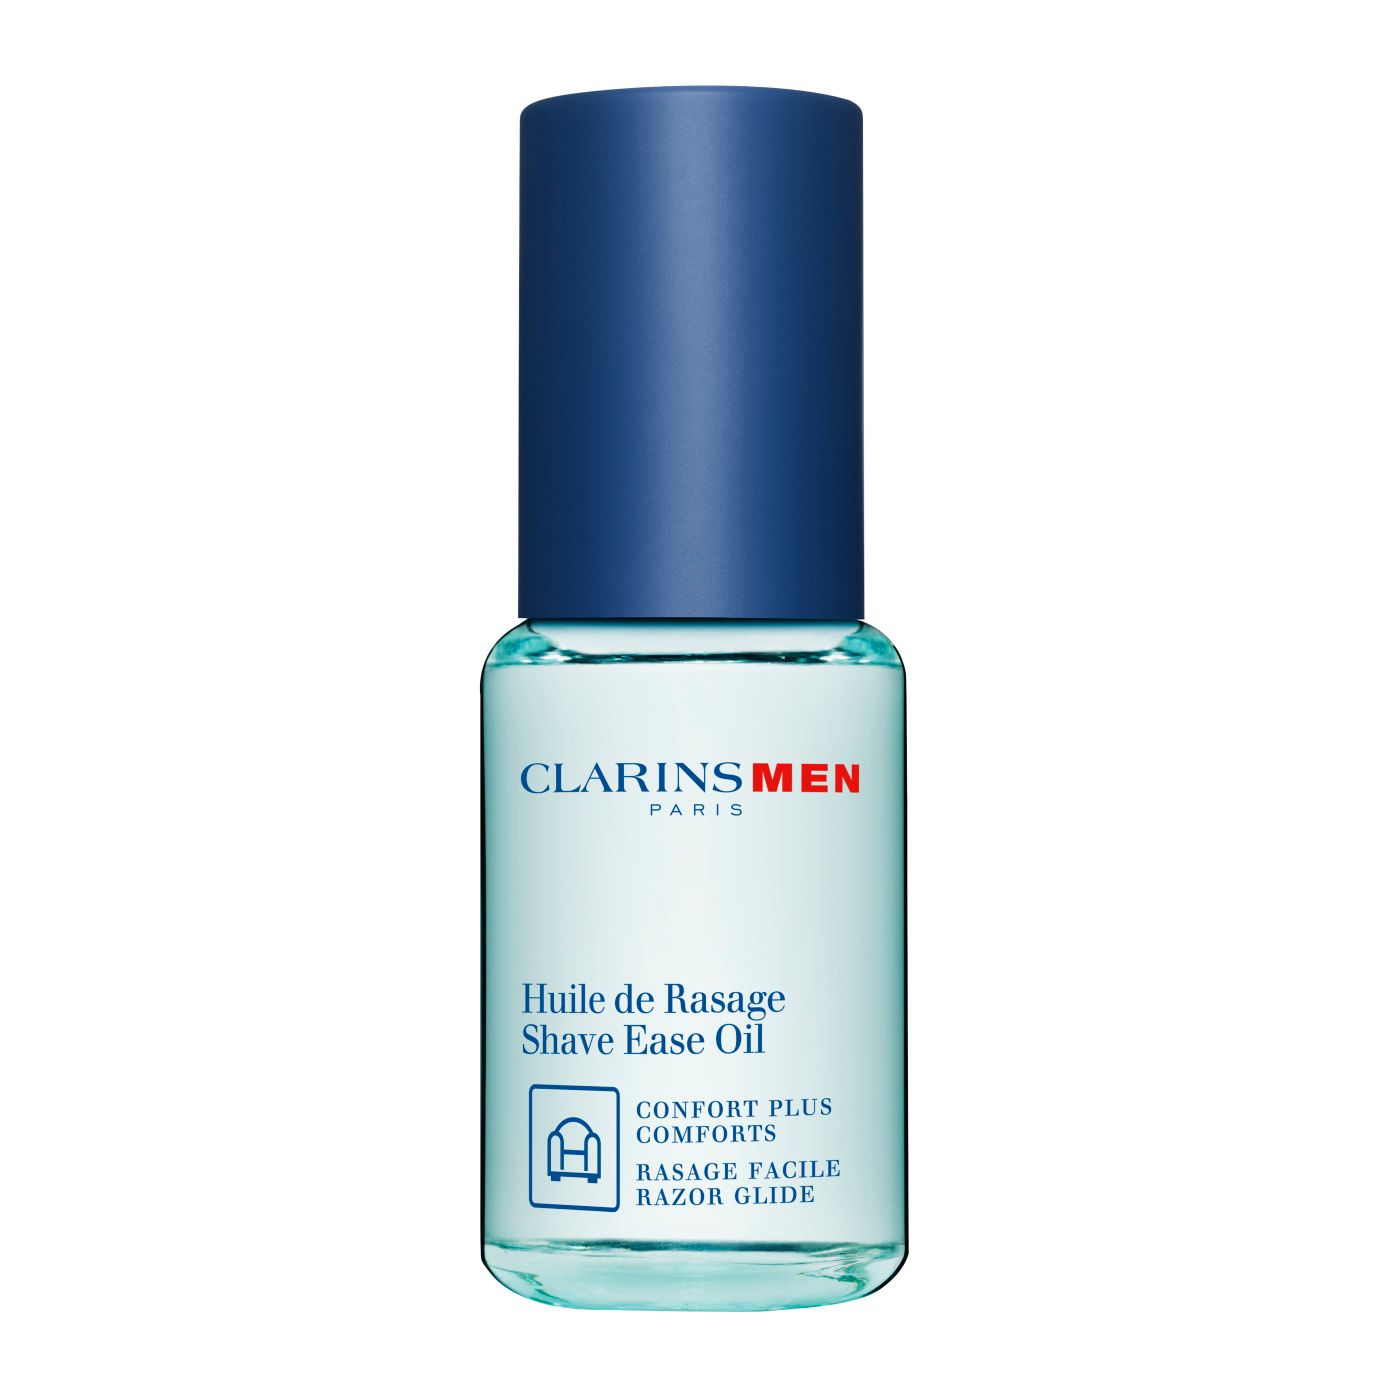 Clarins Men Shave Ease Two-in-One Oil